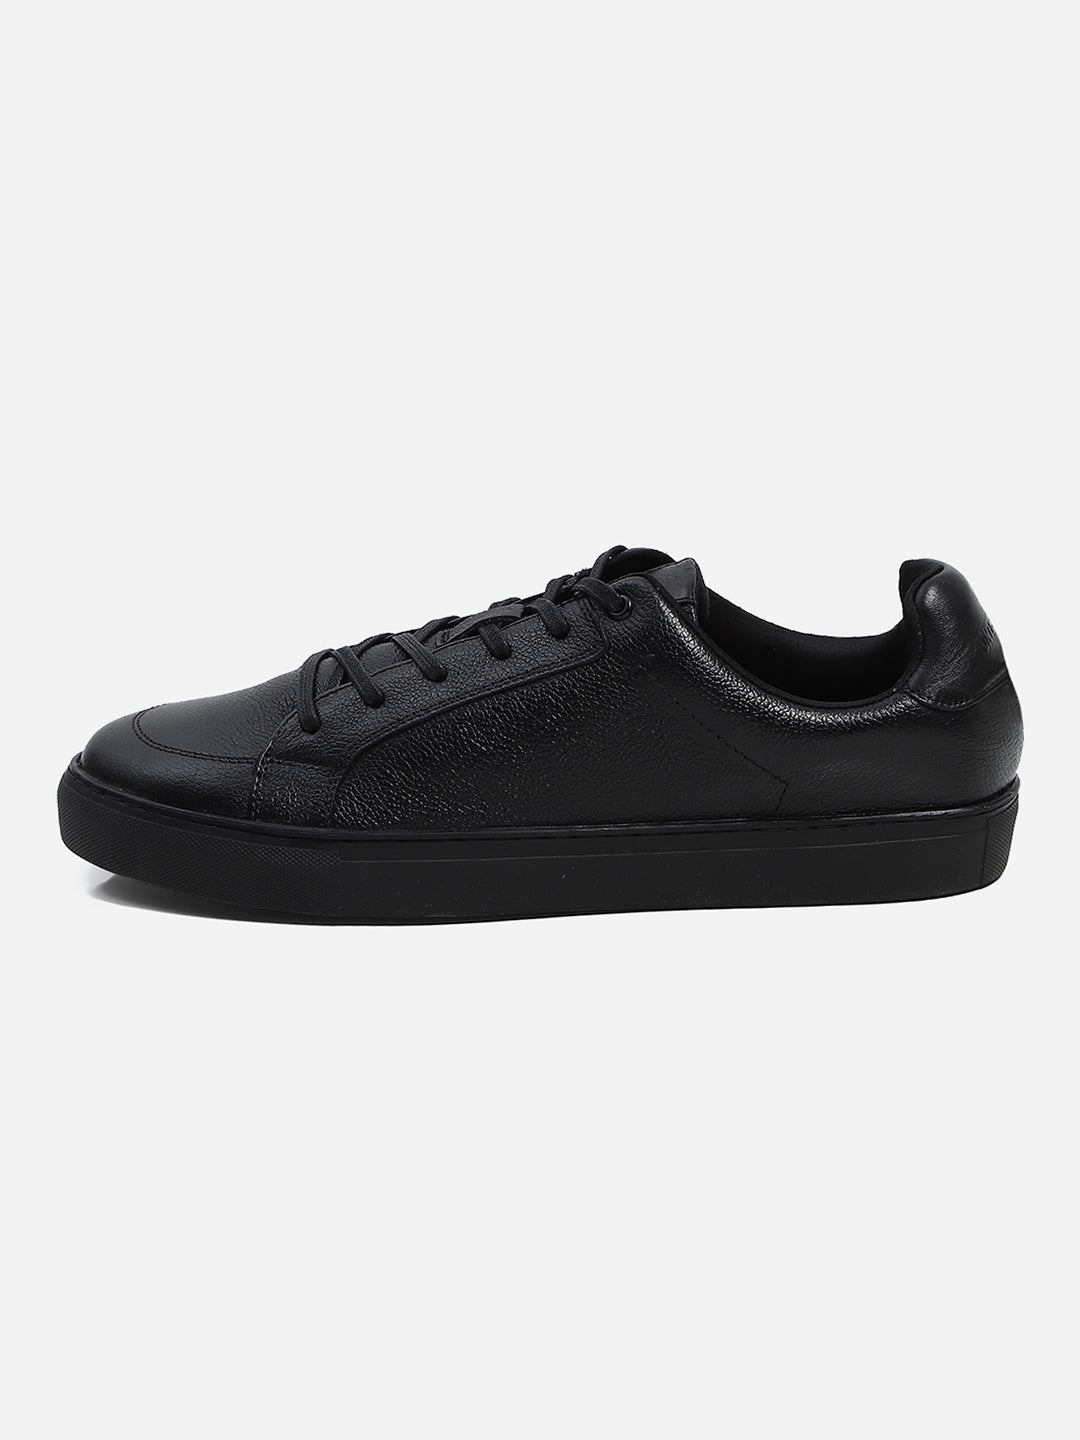 Men Black Lace Up Genuine Leather Casual Sneakers